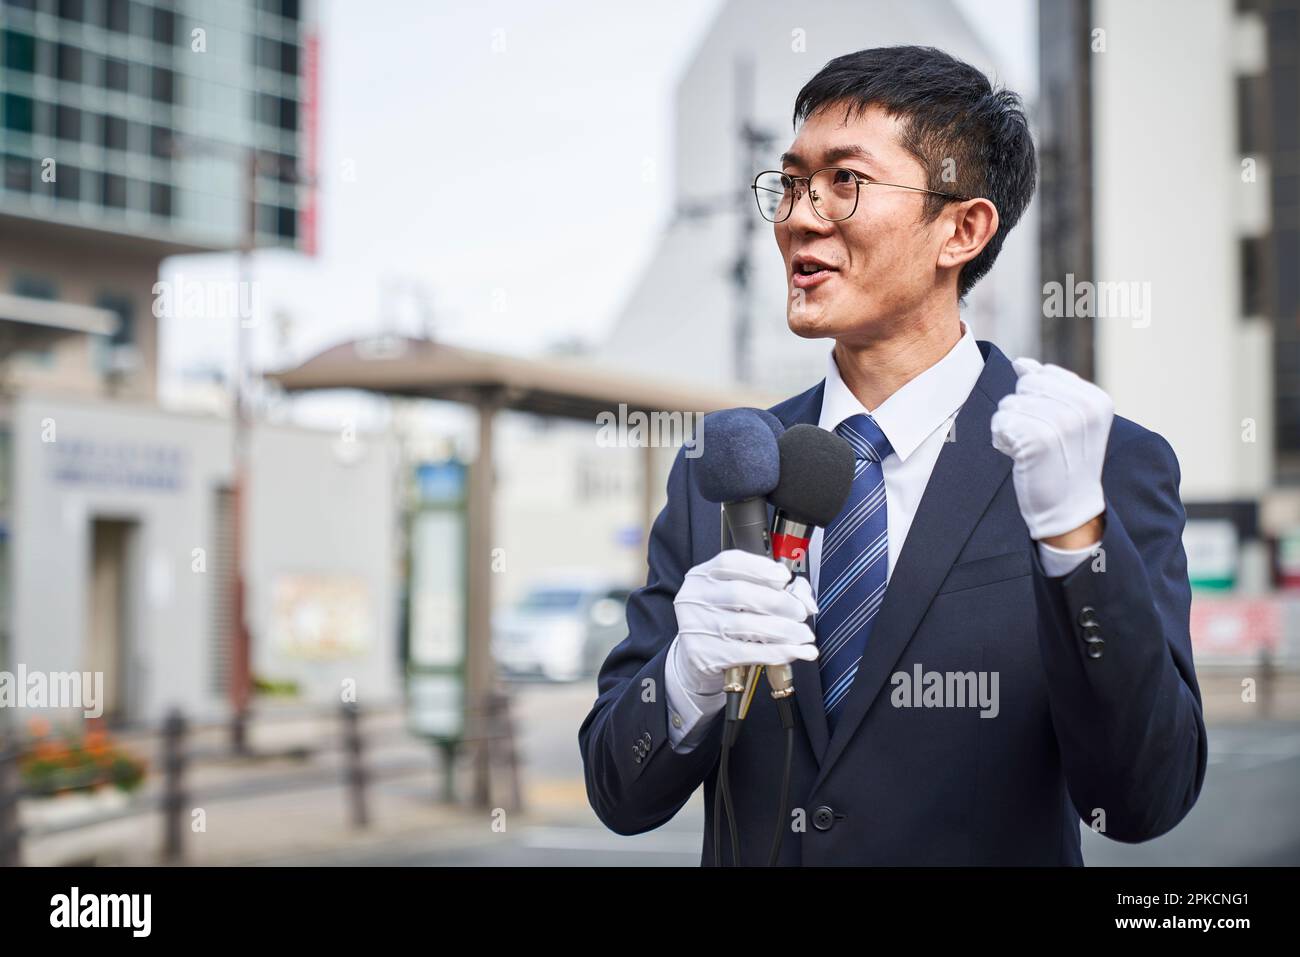 Man in a suit giving a speech in the city Stock Photo